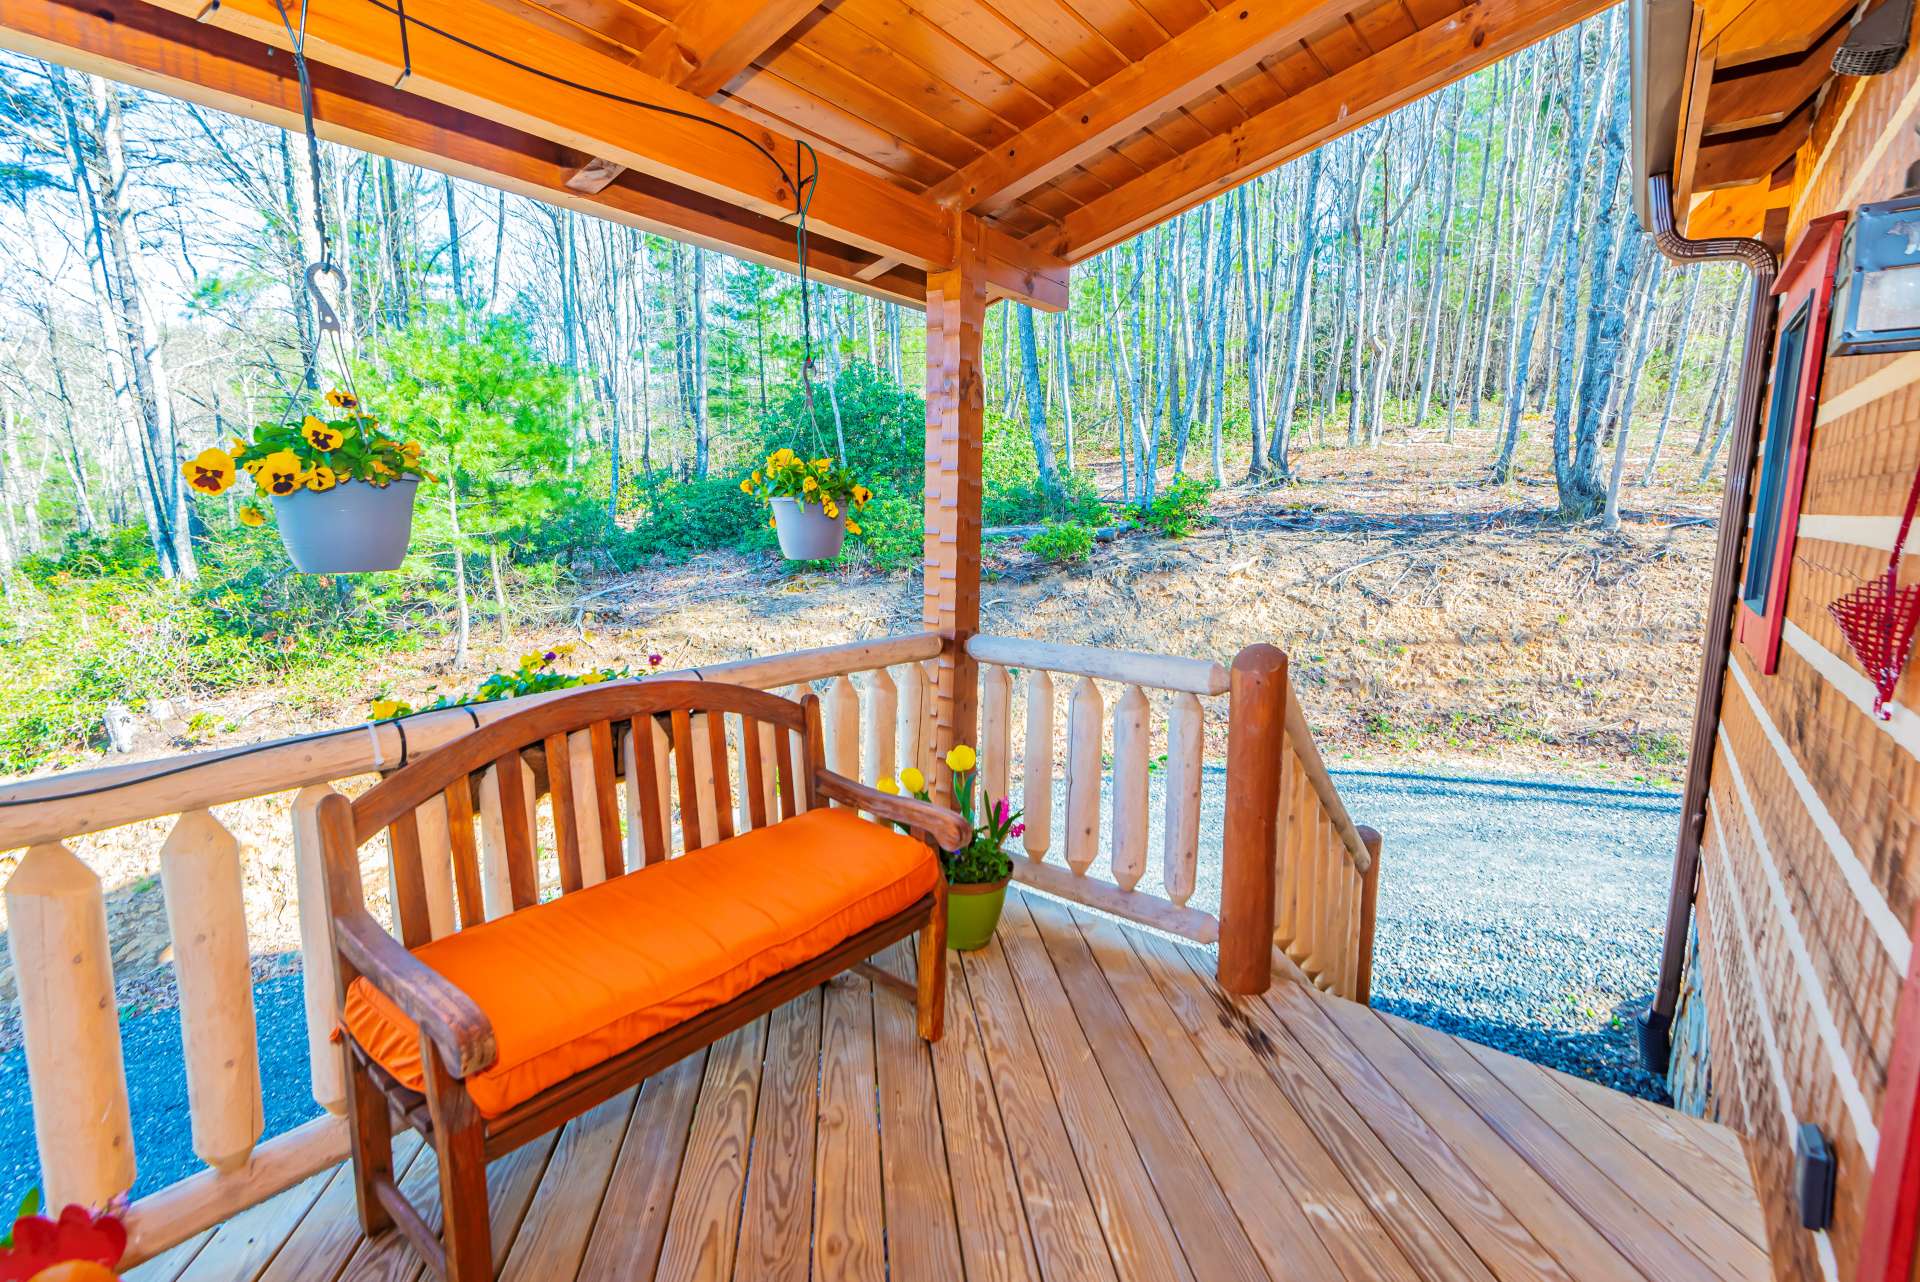 A sweet covered porch welcomes you to sit and relax with the sounds of Nature all around you.